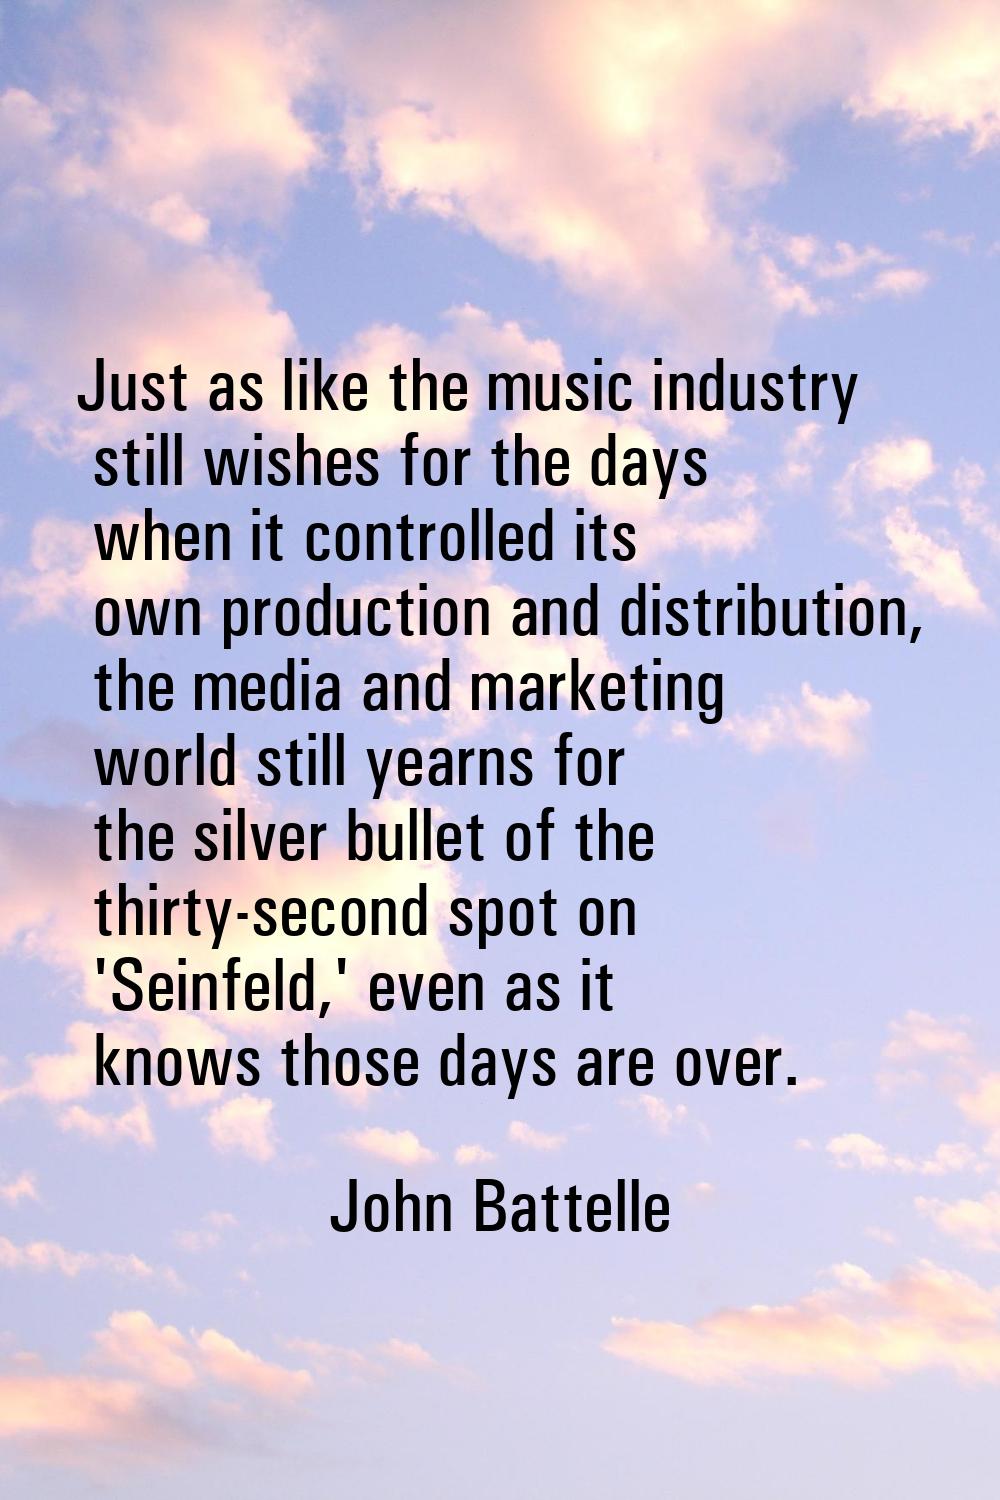 Just as like the music industry still wishes for the days when it controlled its own production and